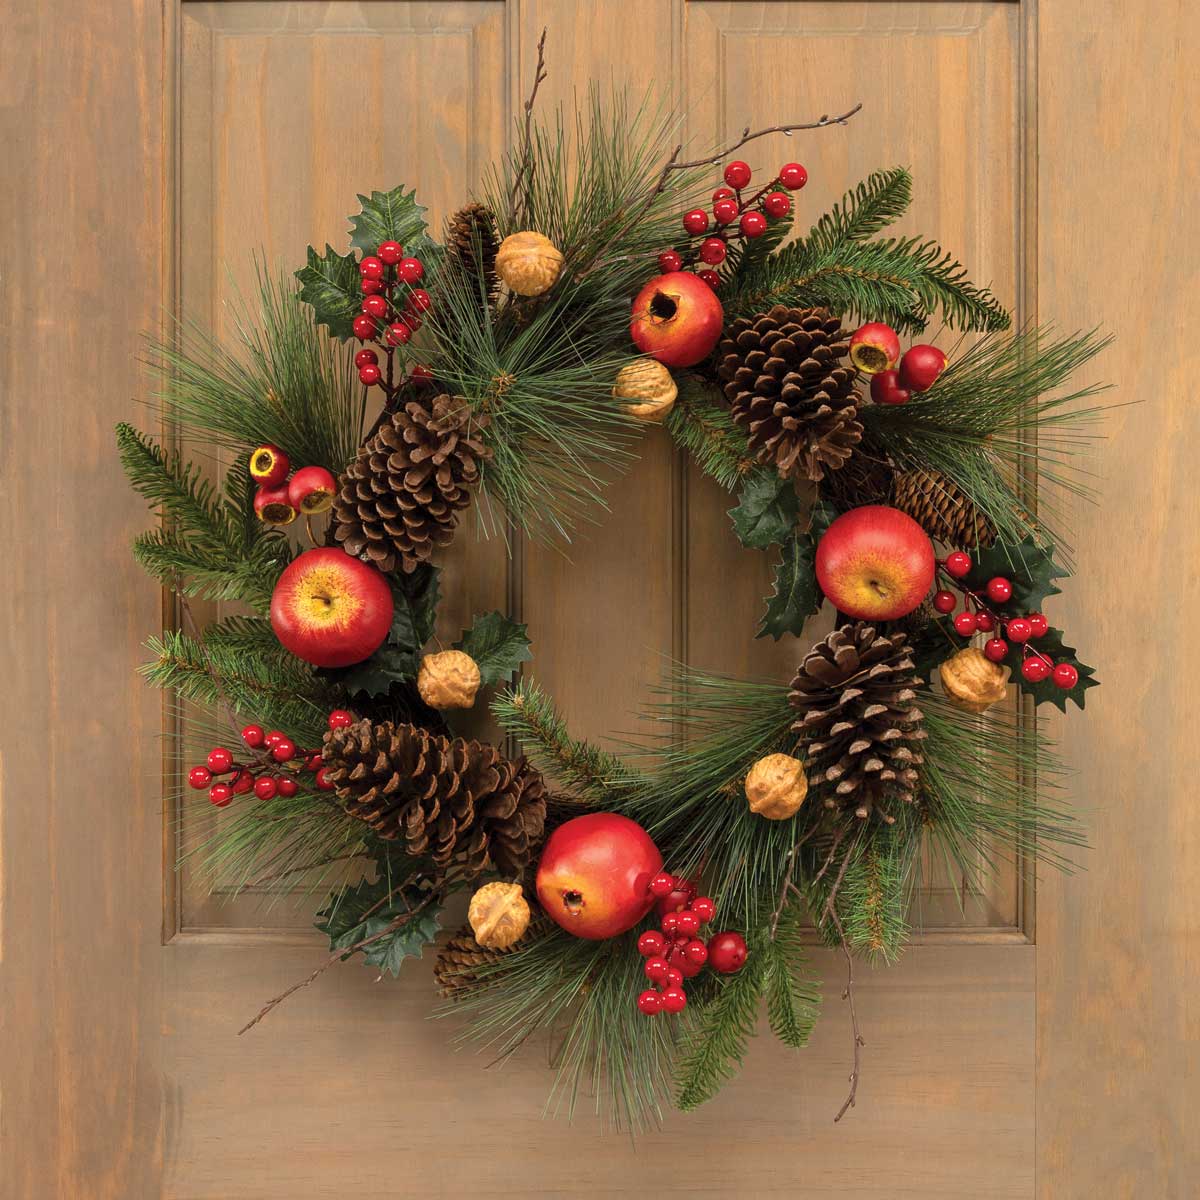 !POMEGRANATE AND PINE WREATH 24"